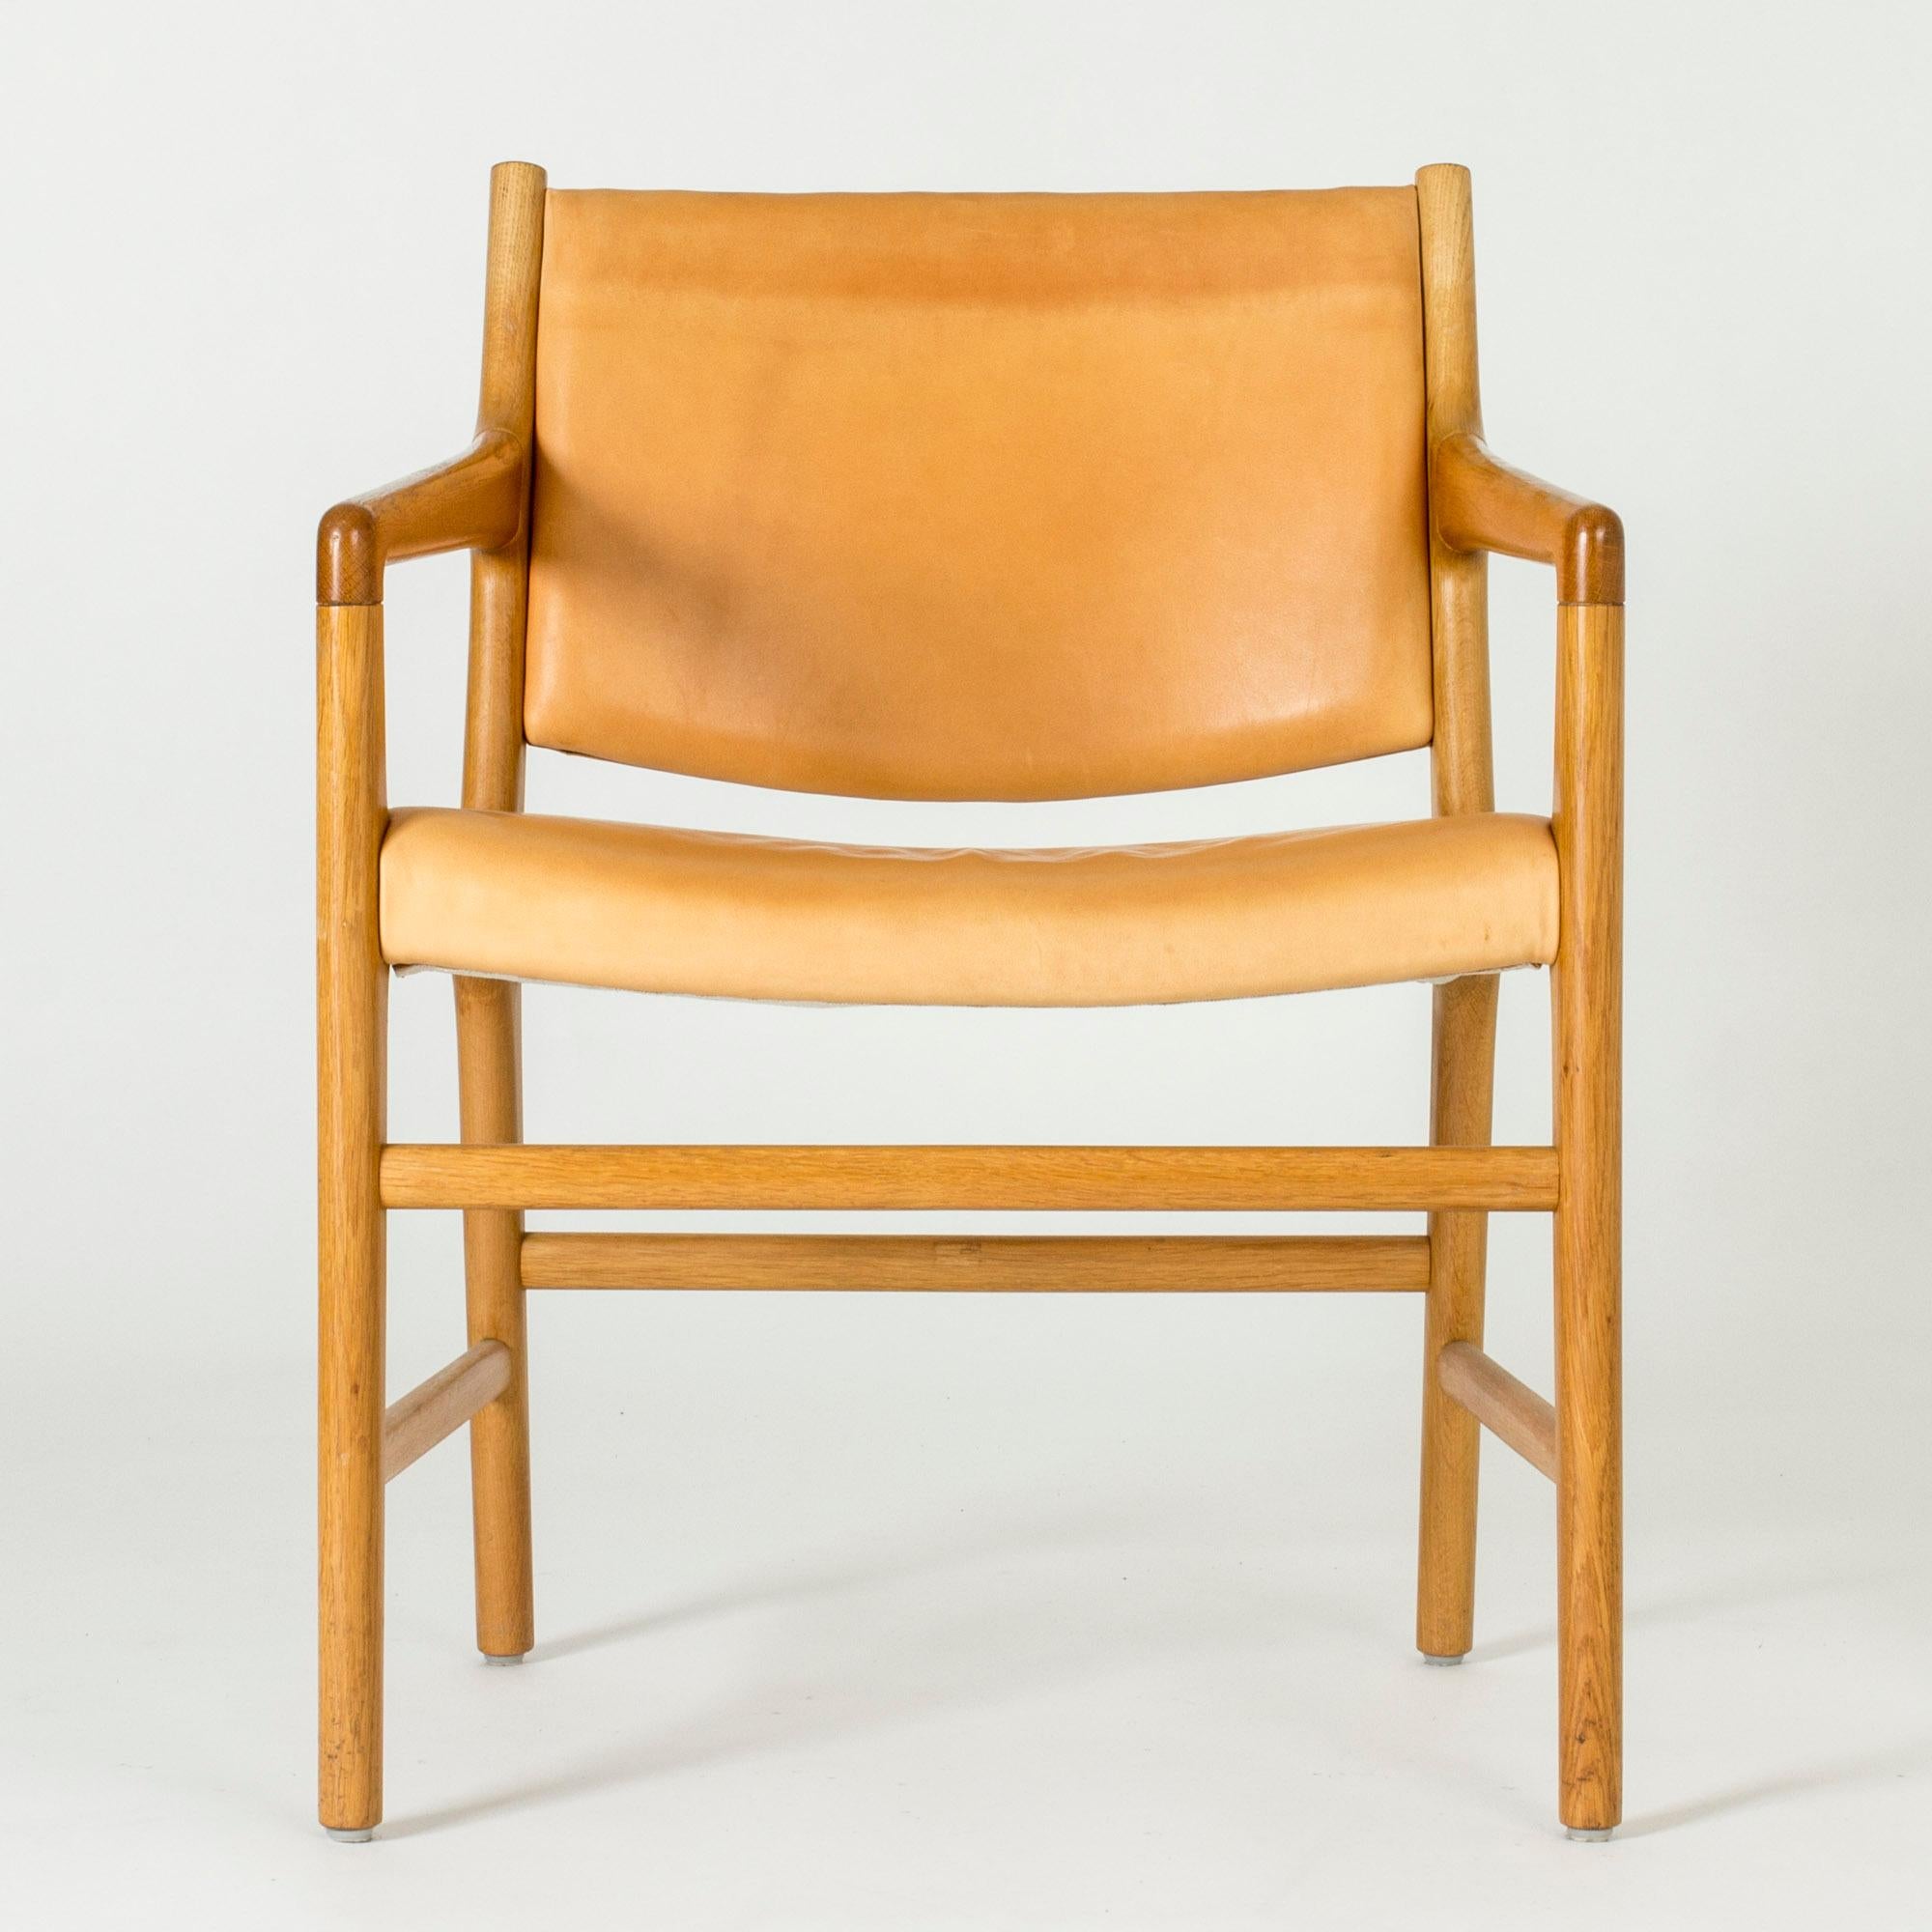 Elegant “JH 507” armchair by Hans J. Wegner, made with an oak frame and natural leather seat and back.